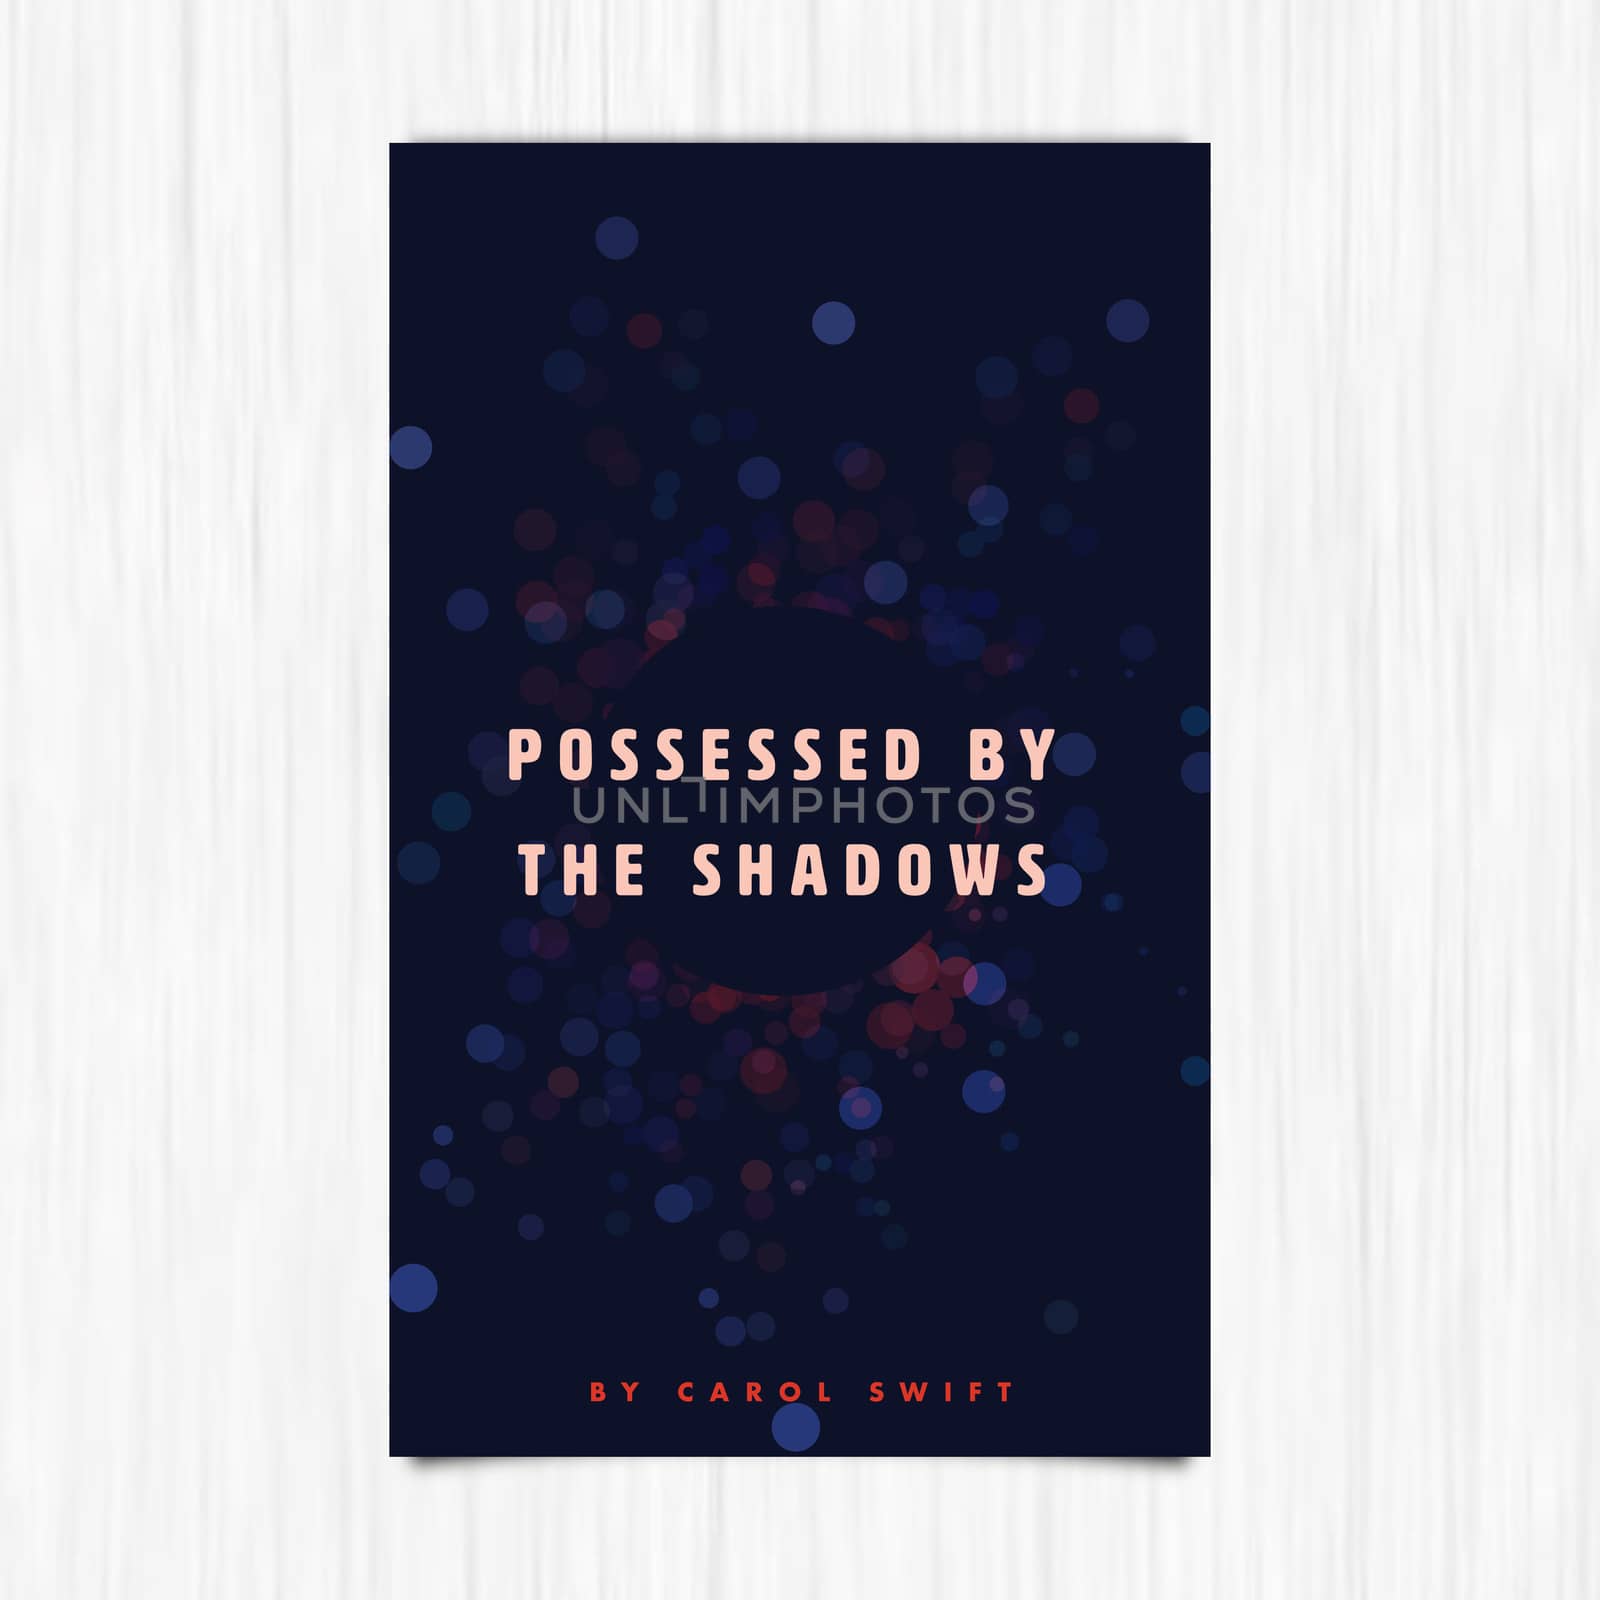 Vector of novel cover with possessed by the shadows text by Wavebreakmedia